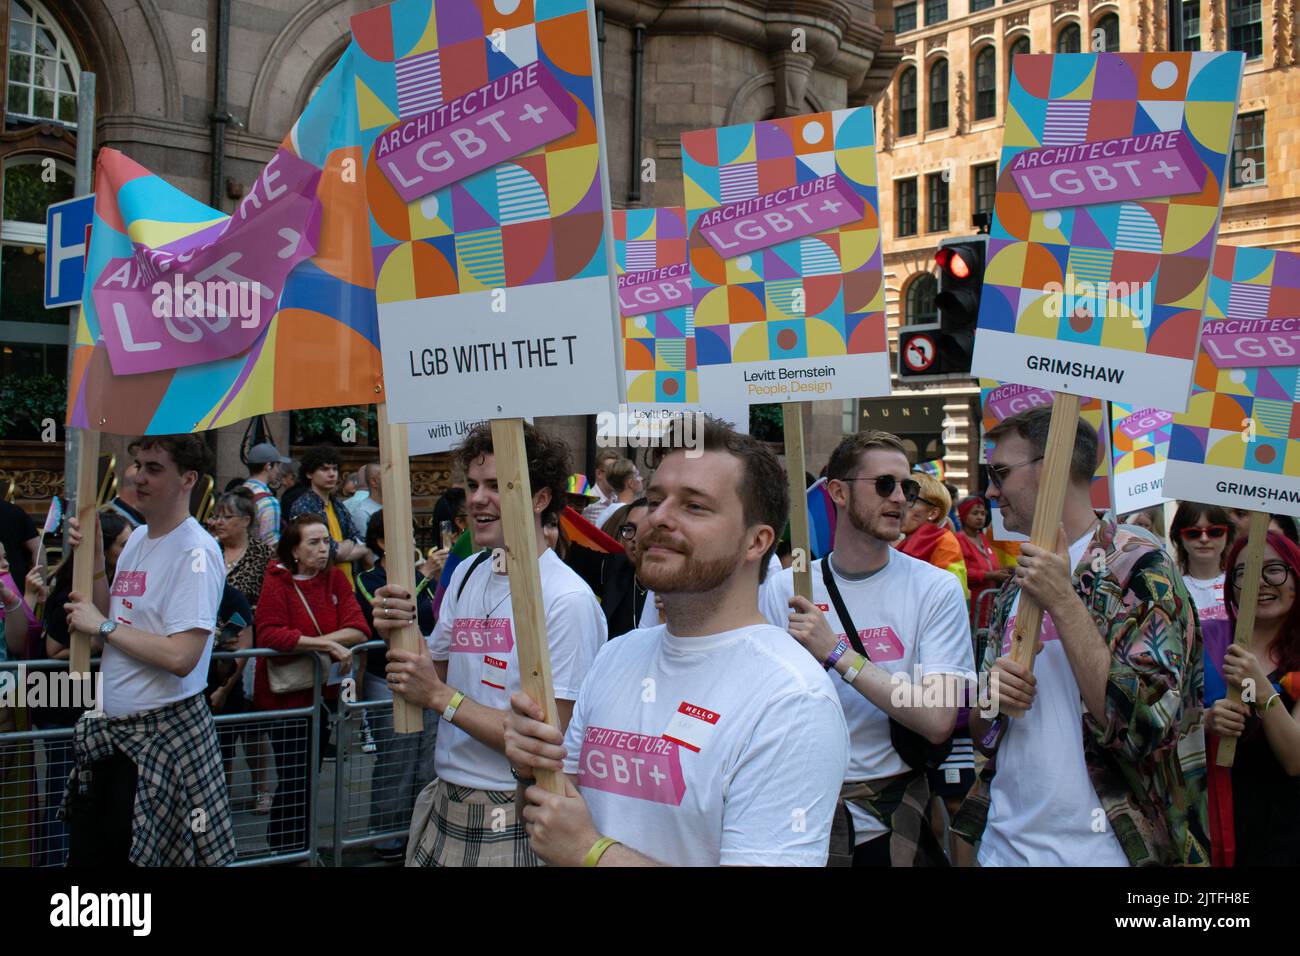 Manchester UK. August 27, 2022. Manchester Pride parade. Architects with sign text Architecture LGBT+ . Theme March for Peace. Stock Photo